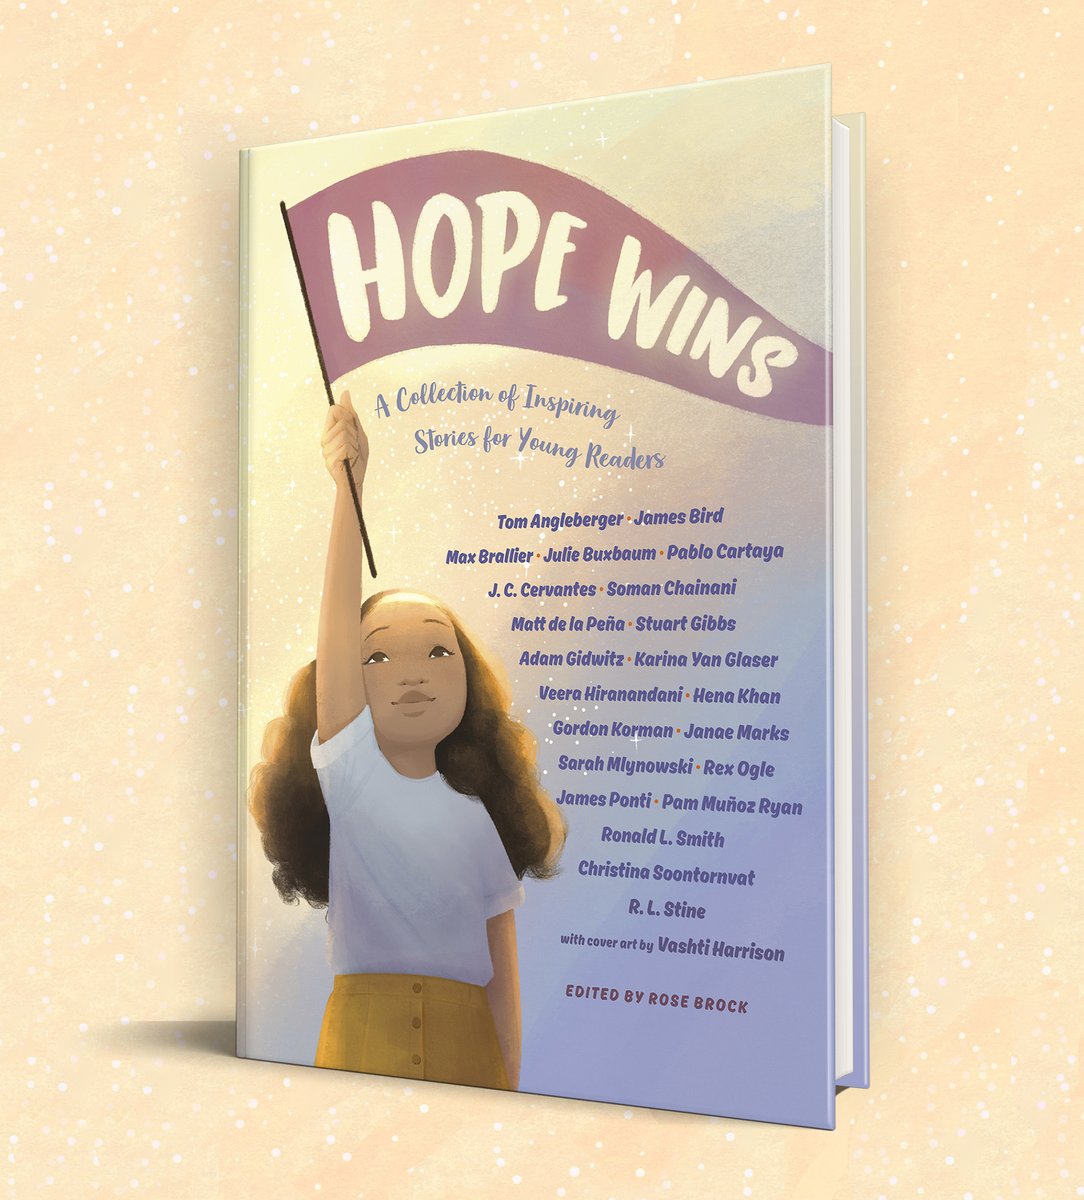 Happy book birthday to HOPE WINS! This inspiring collection is available everywhere today in paperback!